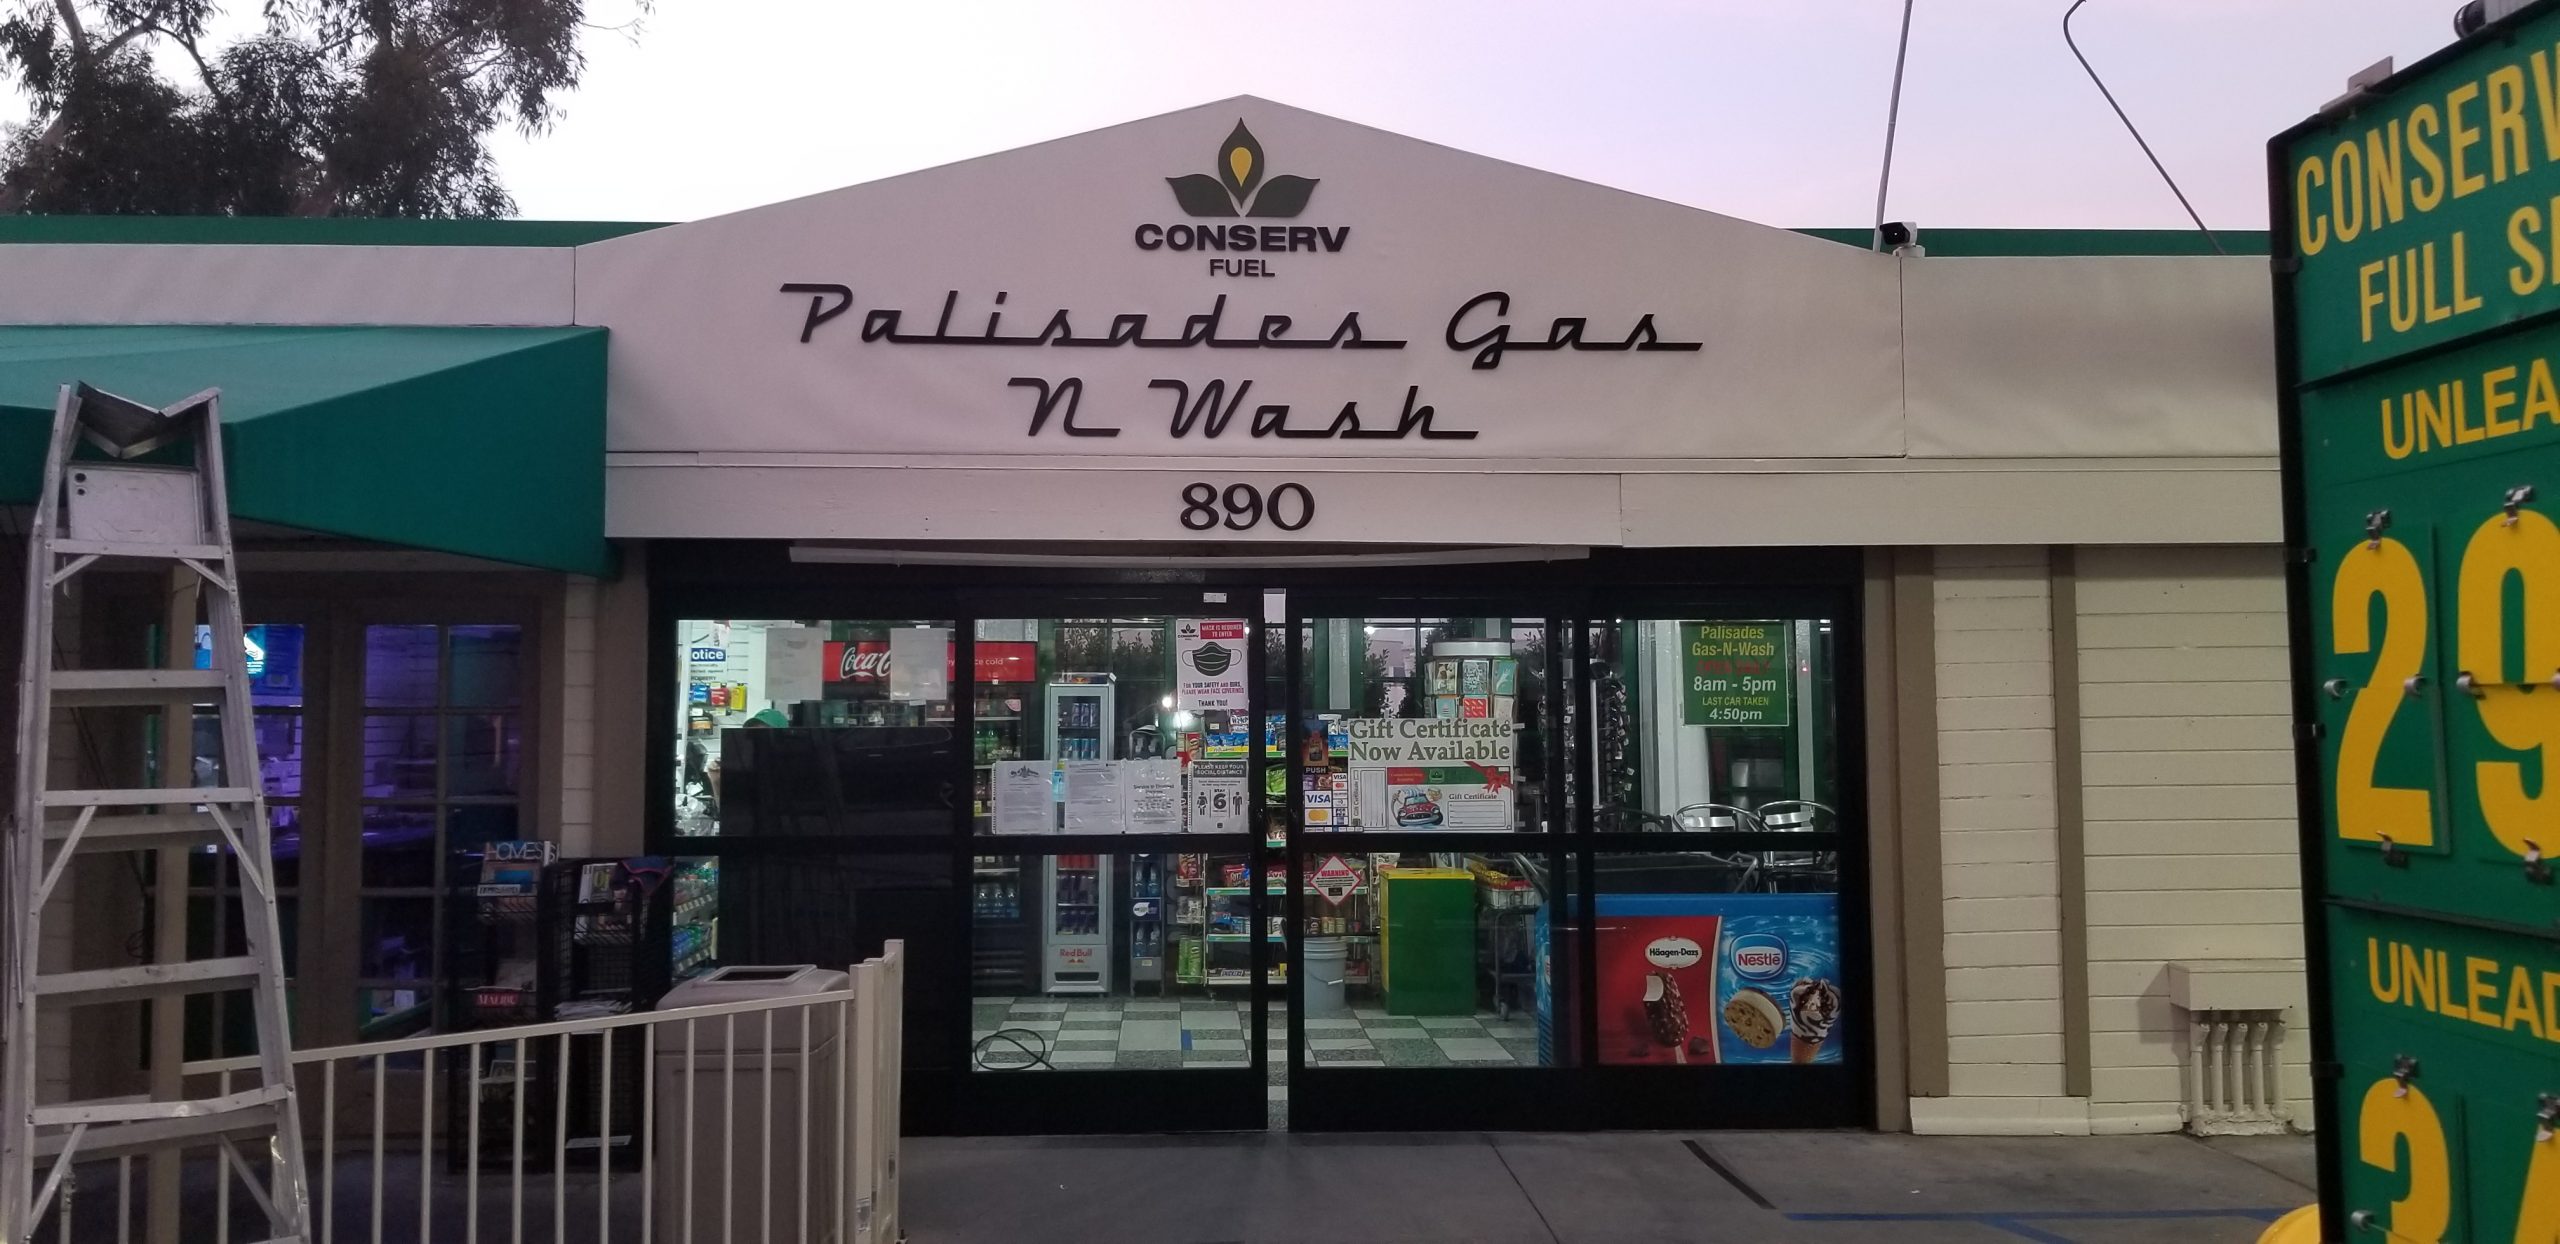 These are the custom dimensional letters sign made for Palisades Gas N Wash located at Conserv Fuel in the Pacific Palisades.